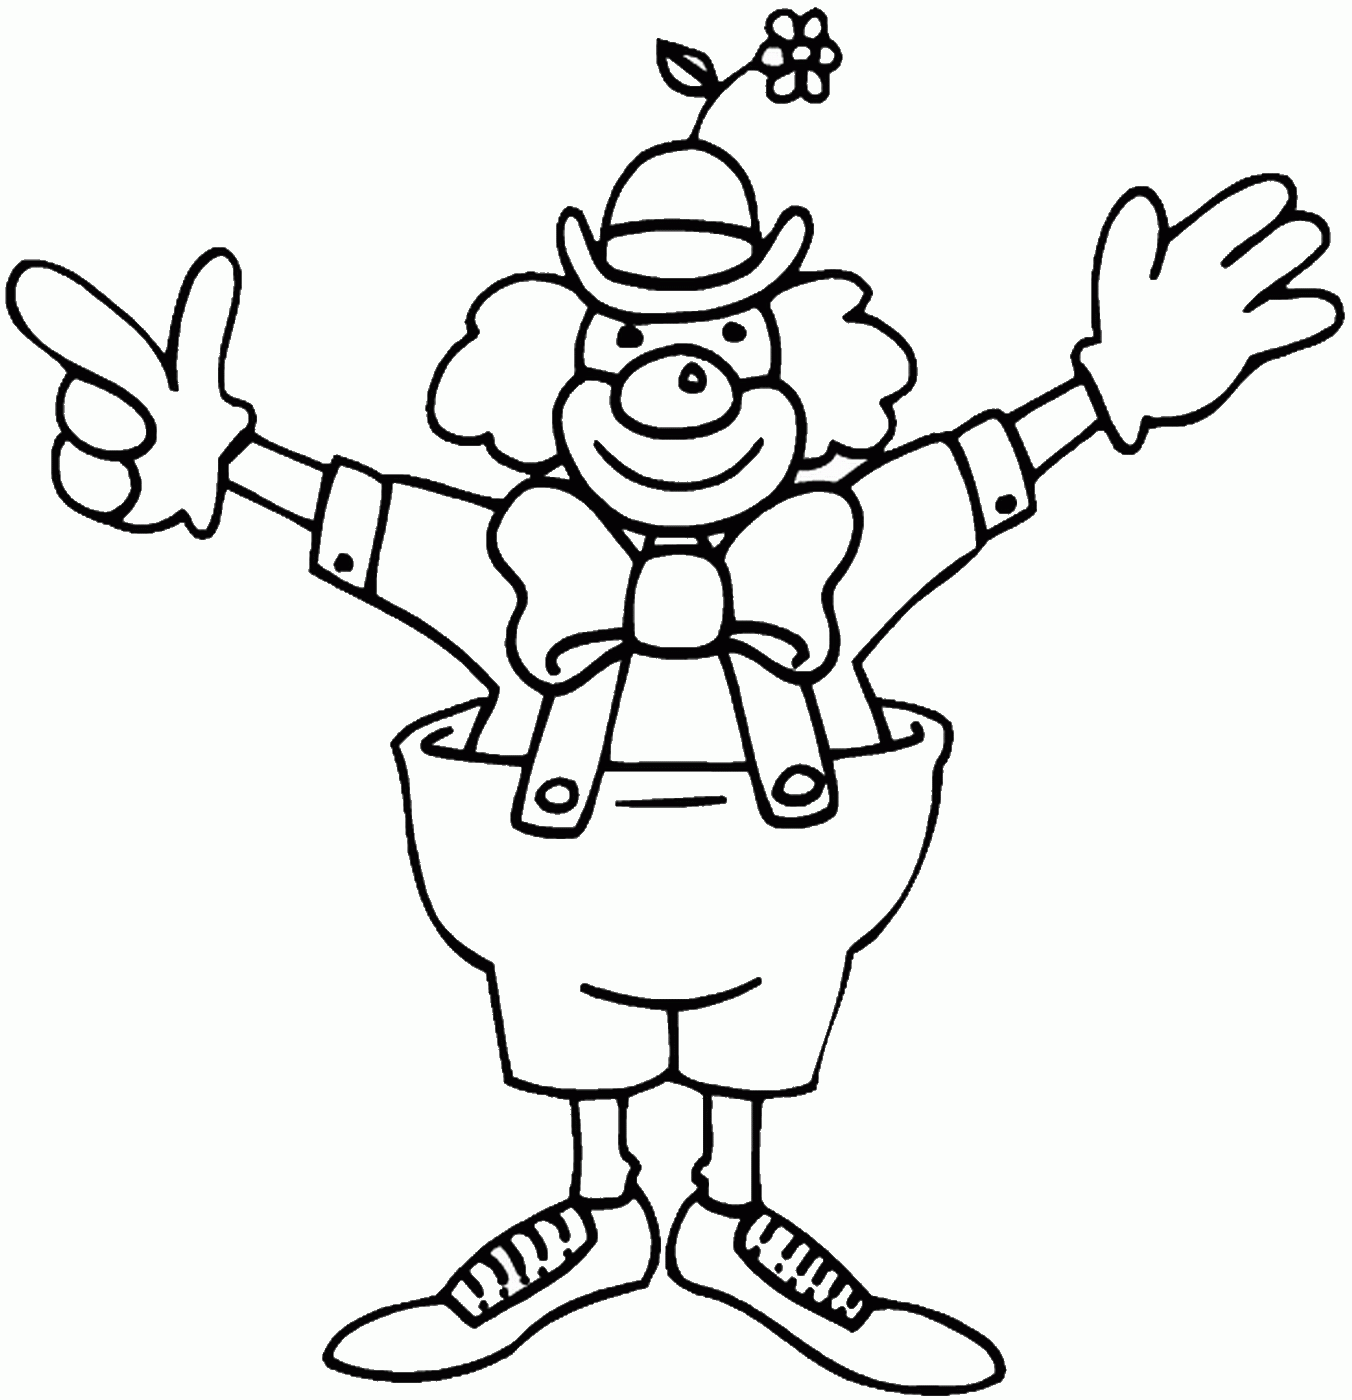 Clown Coloring Pages clown1 Printable 2021 1764 Coloring4free